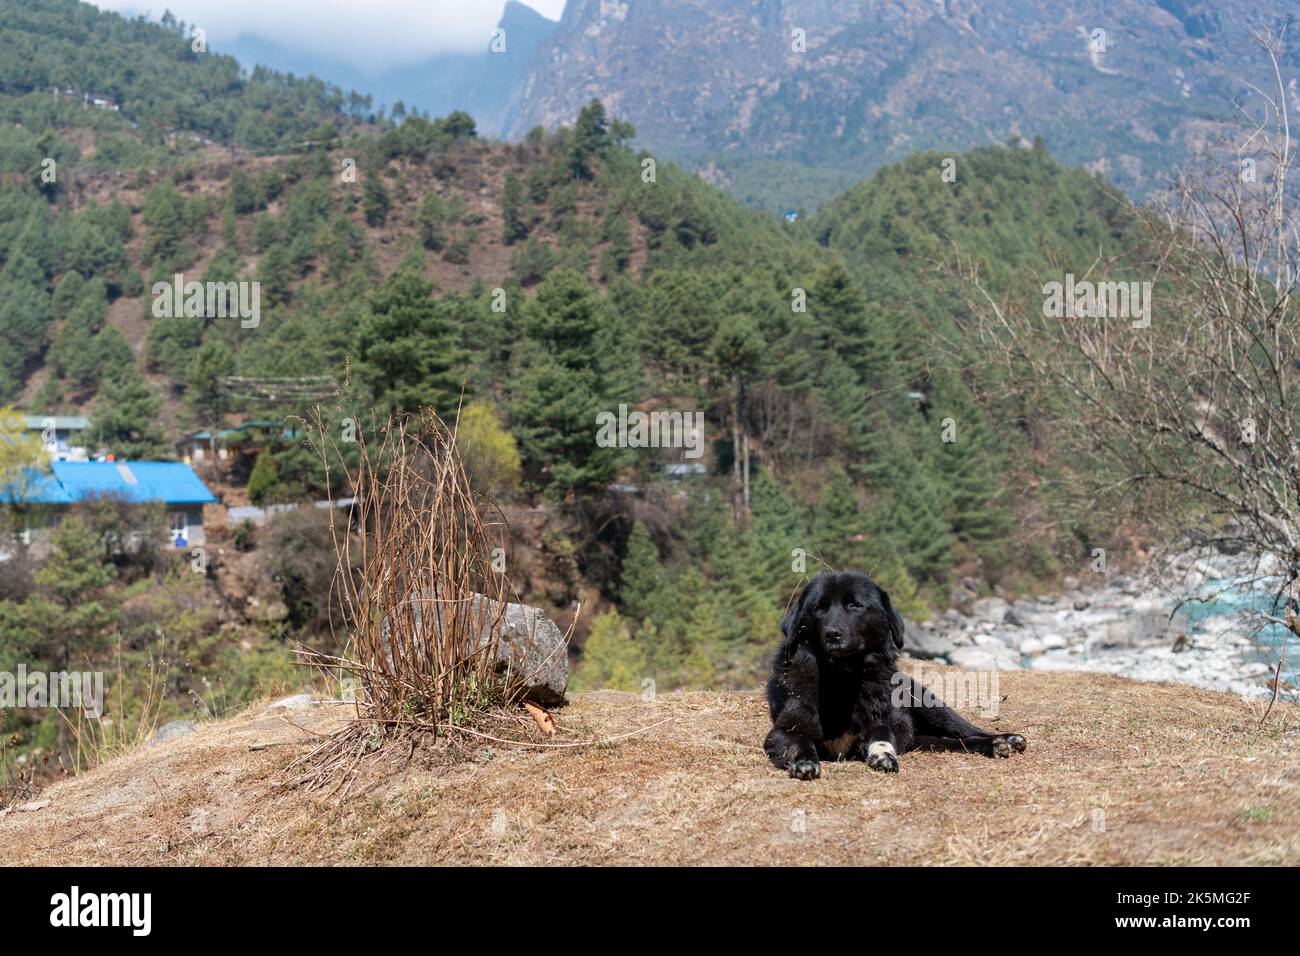 New photo with a dark dog sitting on the high place, Nepal. Stock Photo